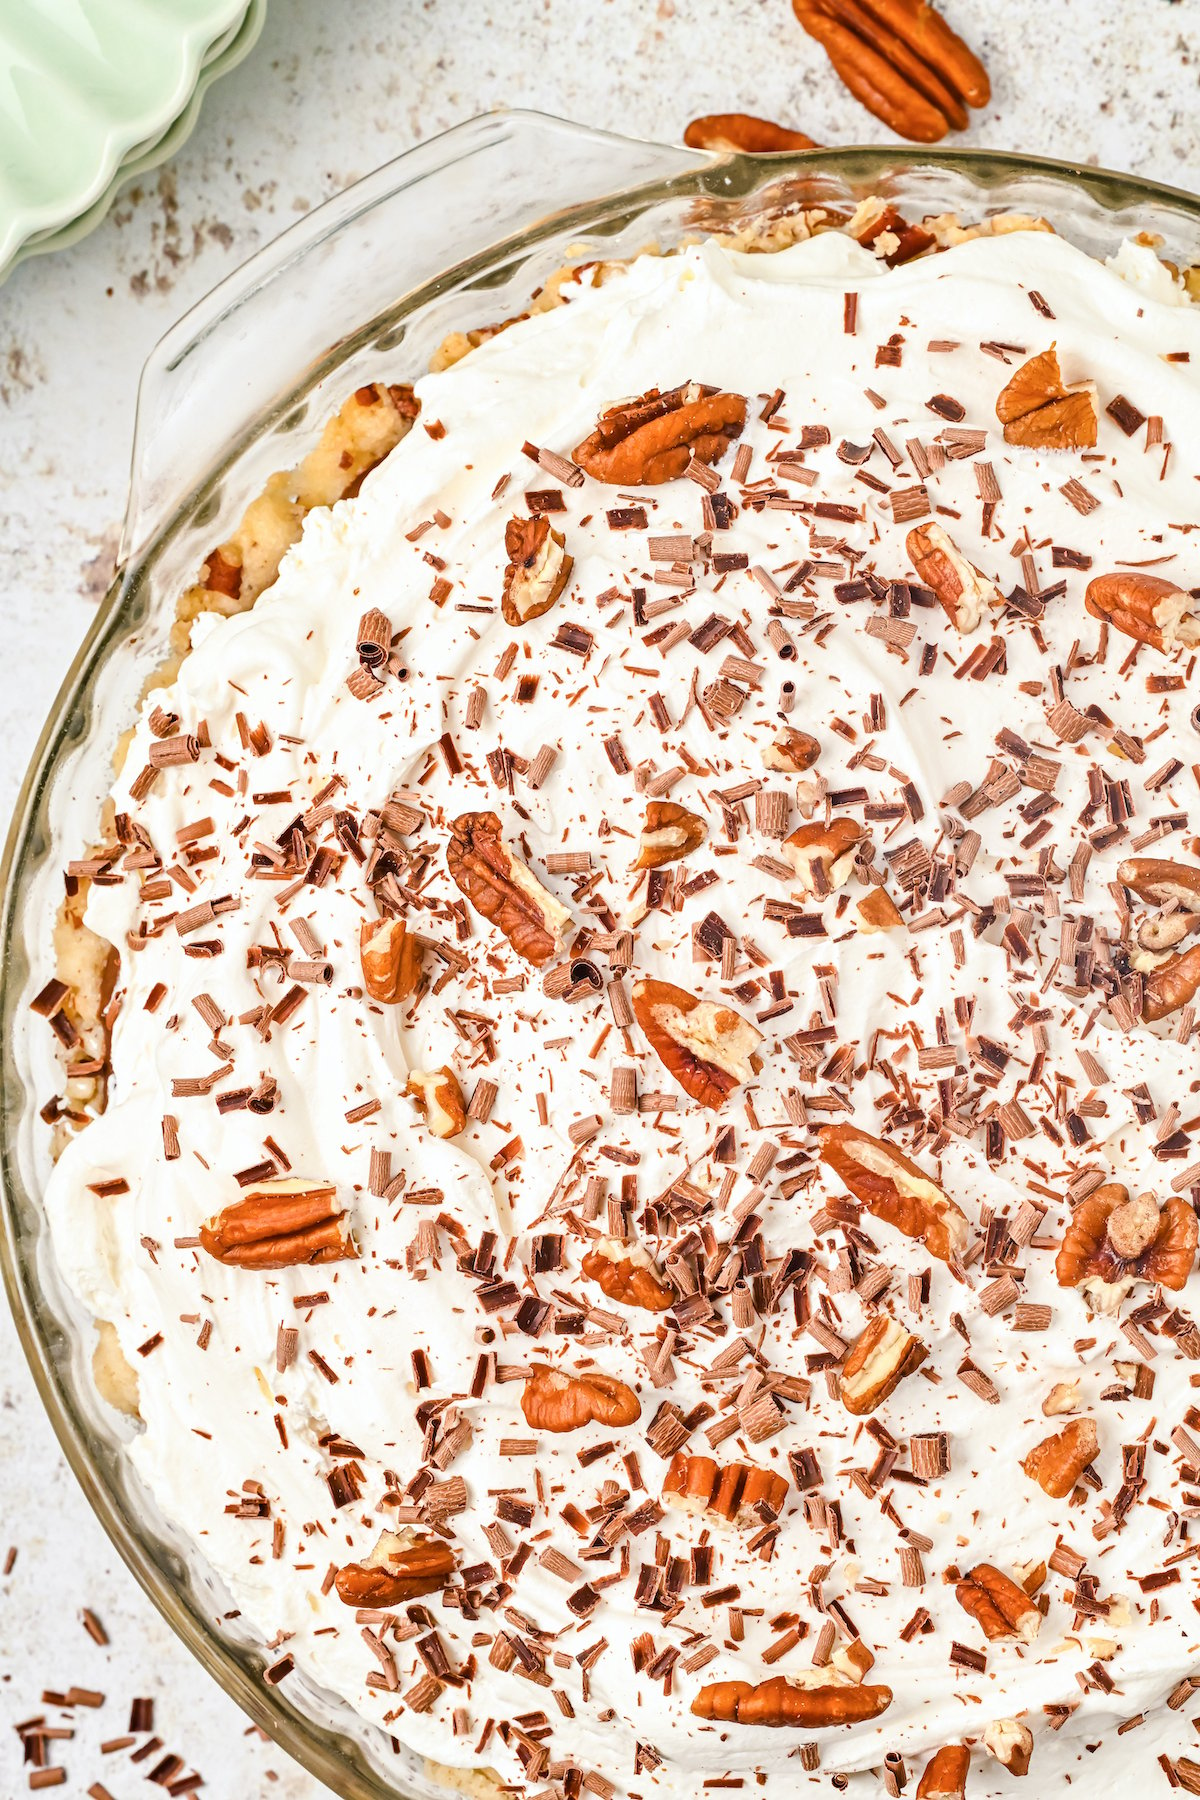 A glass pie dish filled with a possom pie that's topped with cool whip and roughly chopped pecans.